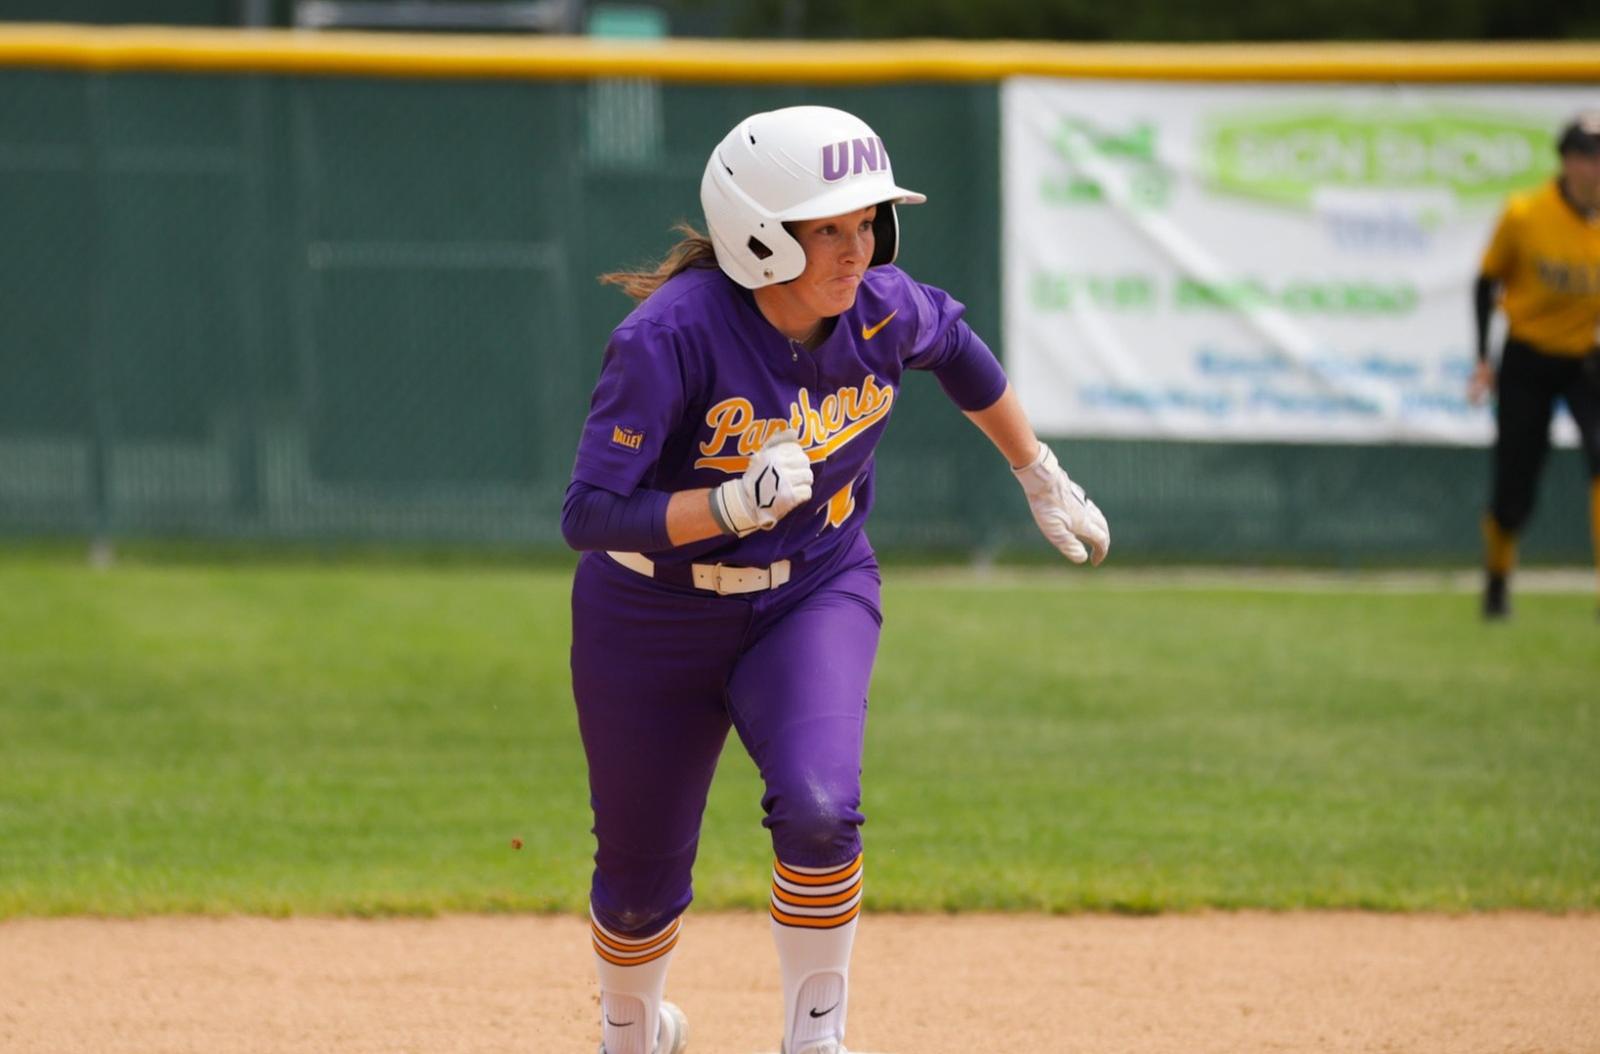 UNI softball victorious in extra-inning thriller against Valparaiso in MVC action